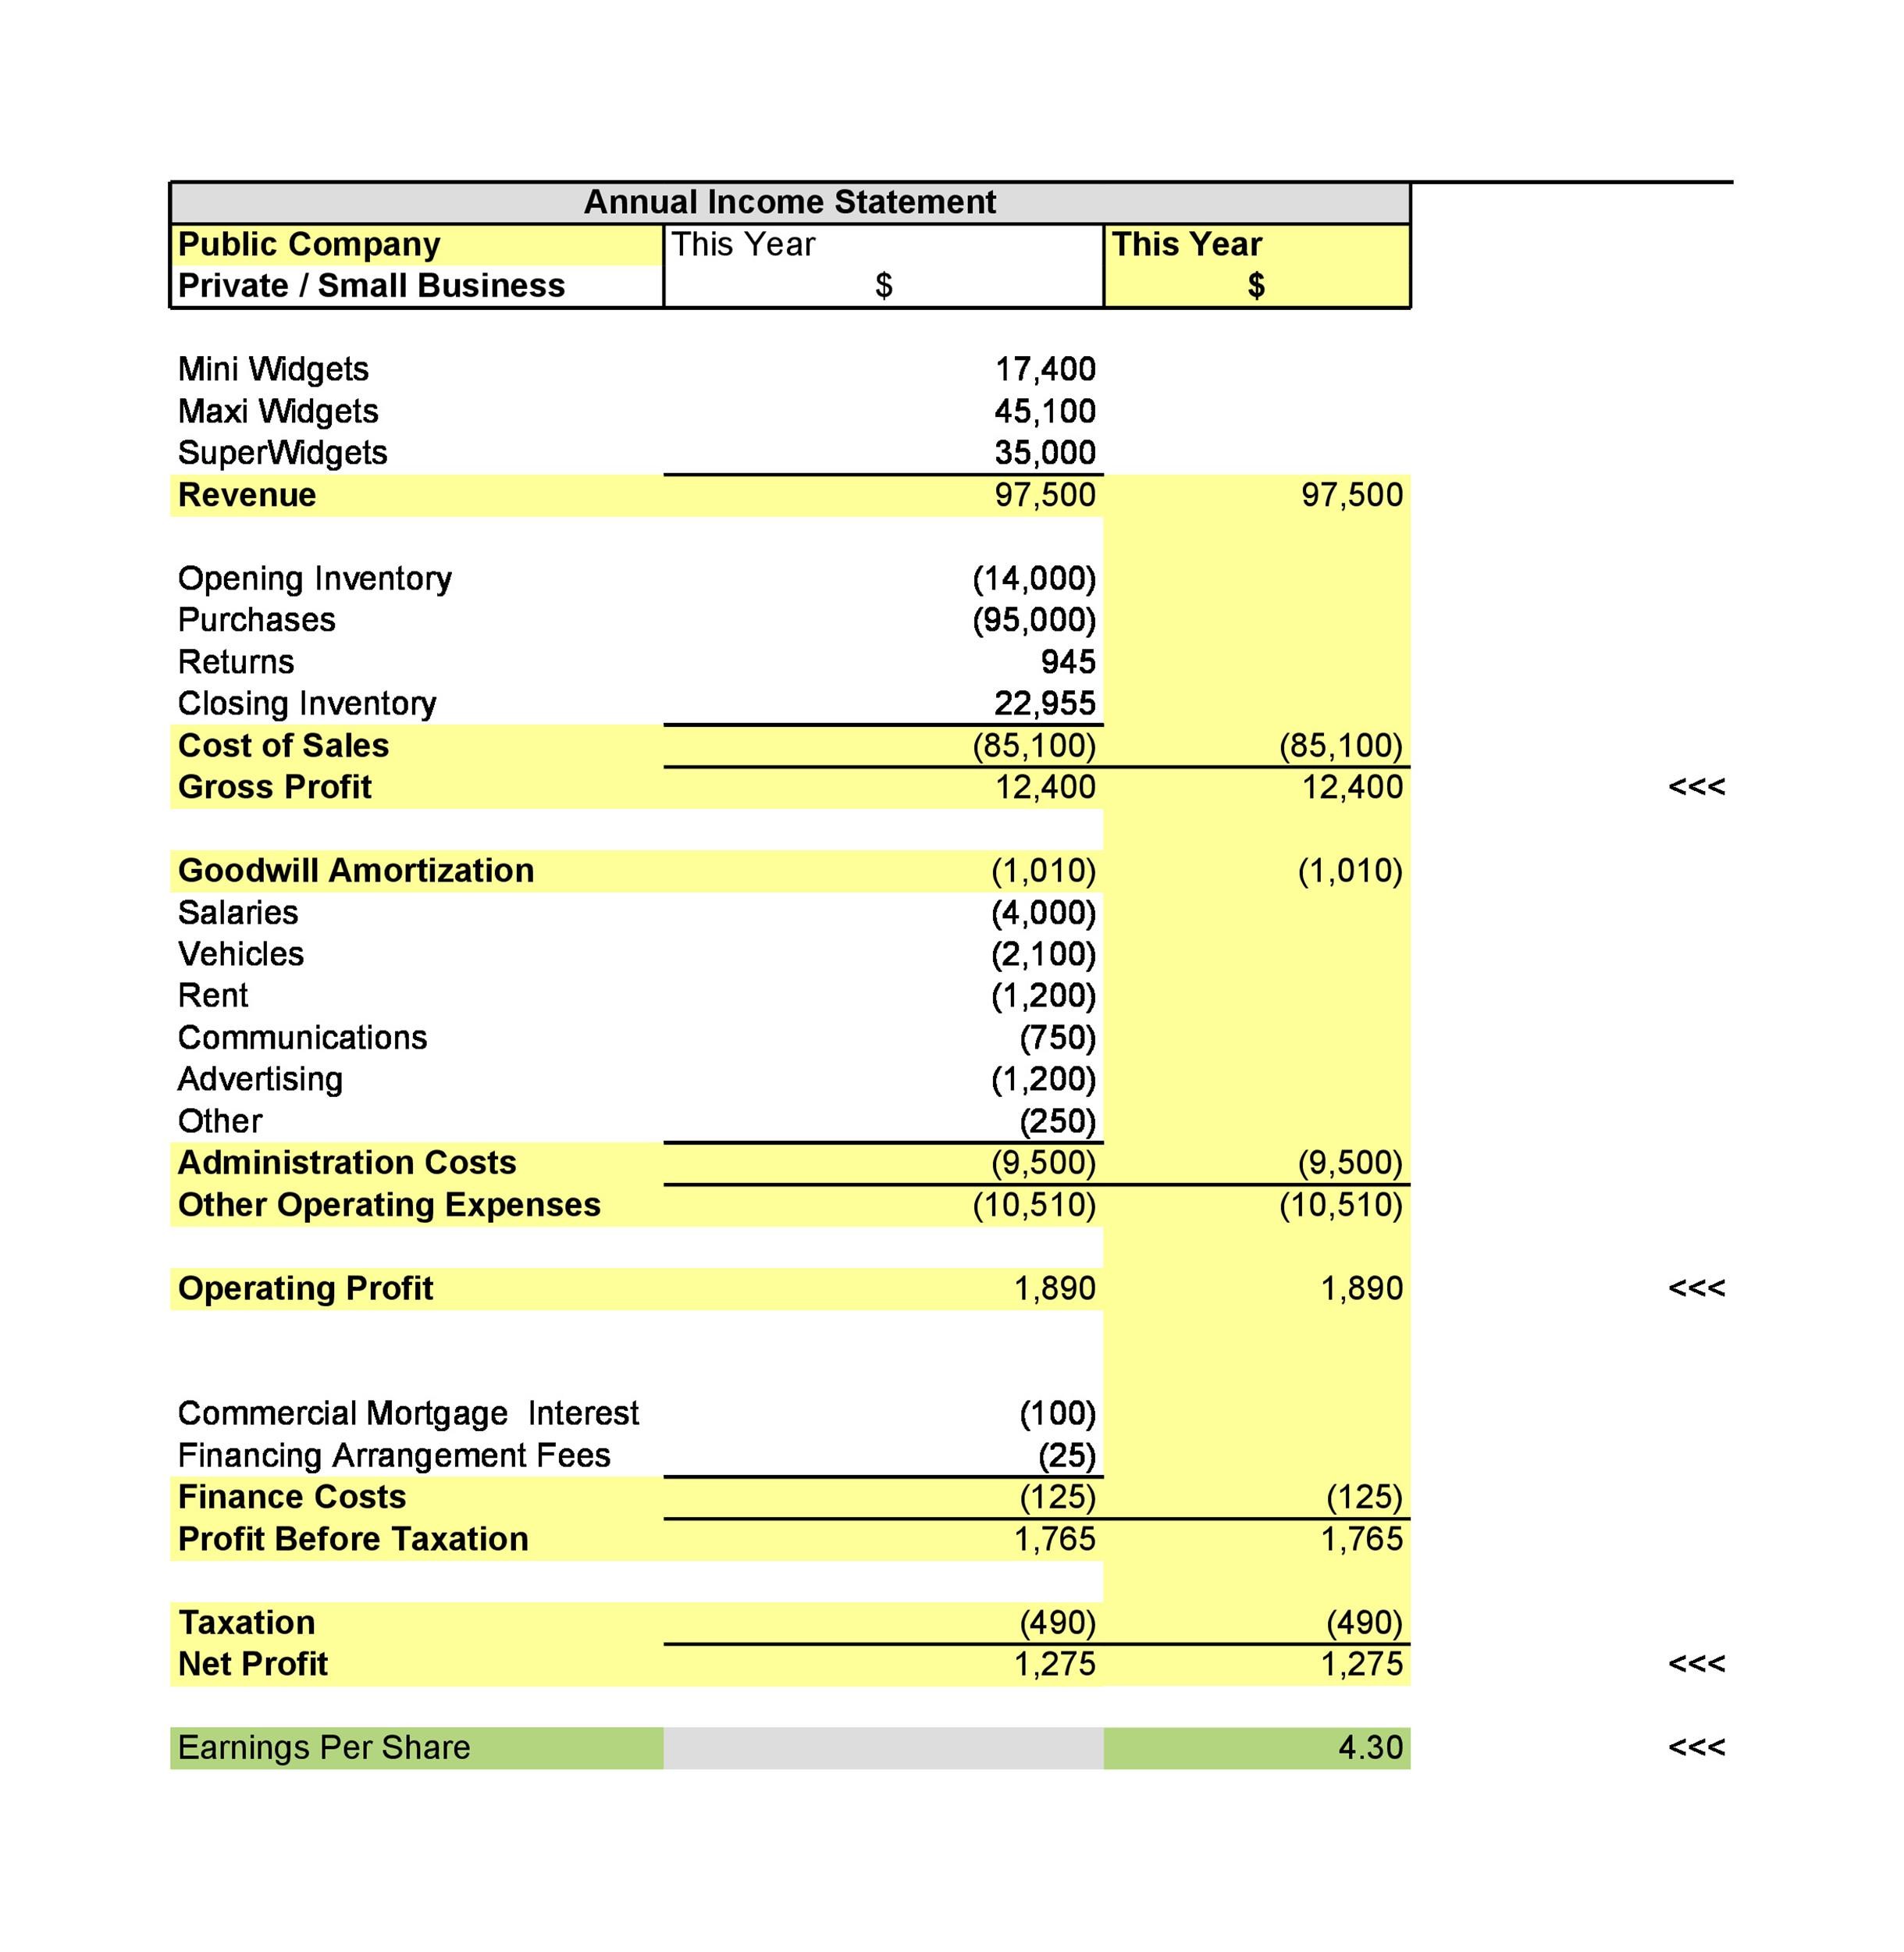 41 FREE Income Statement Templates Examples TemplateLab